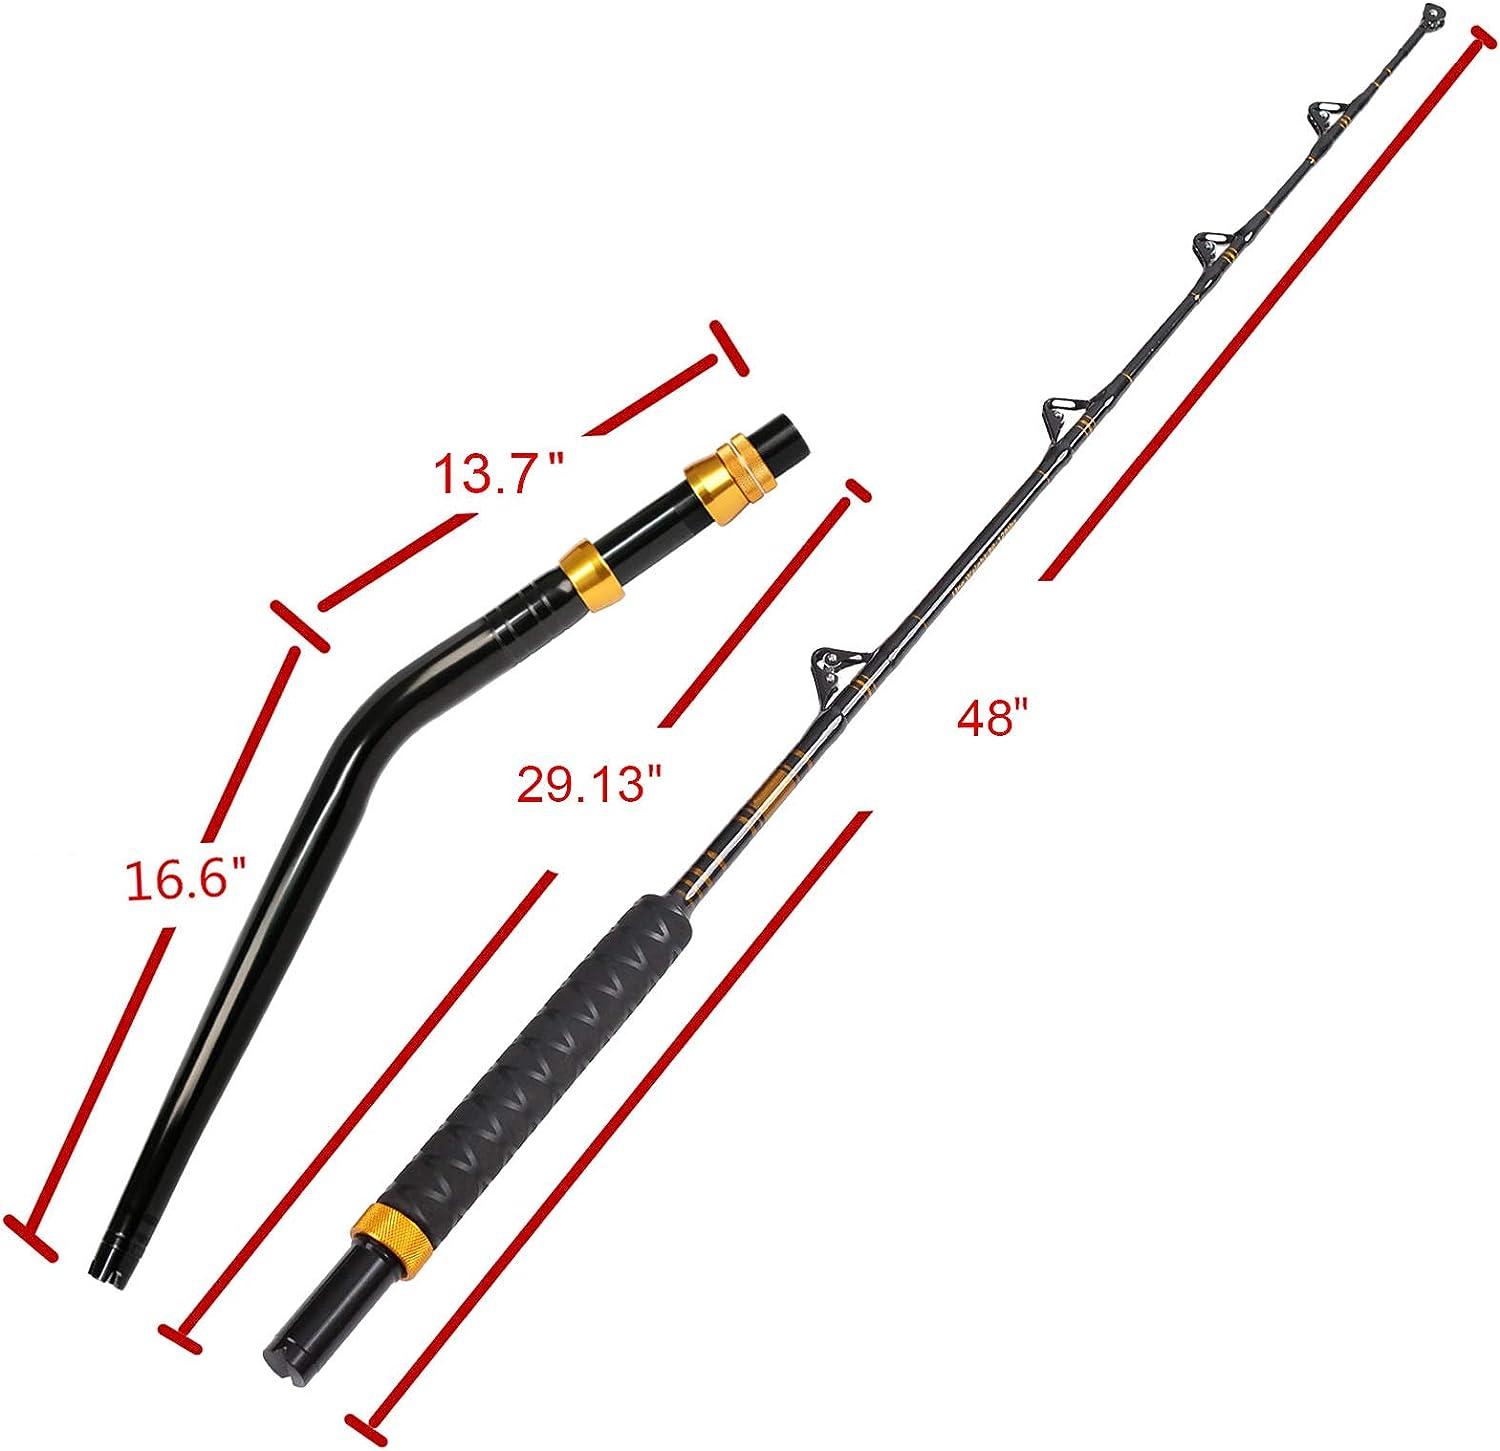  Bent Butt Fishing Rod 80-120lb 2-Piece Trolling Rod  Saltwater Offshore Rod Conventional Boat Fishing Pole